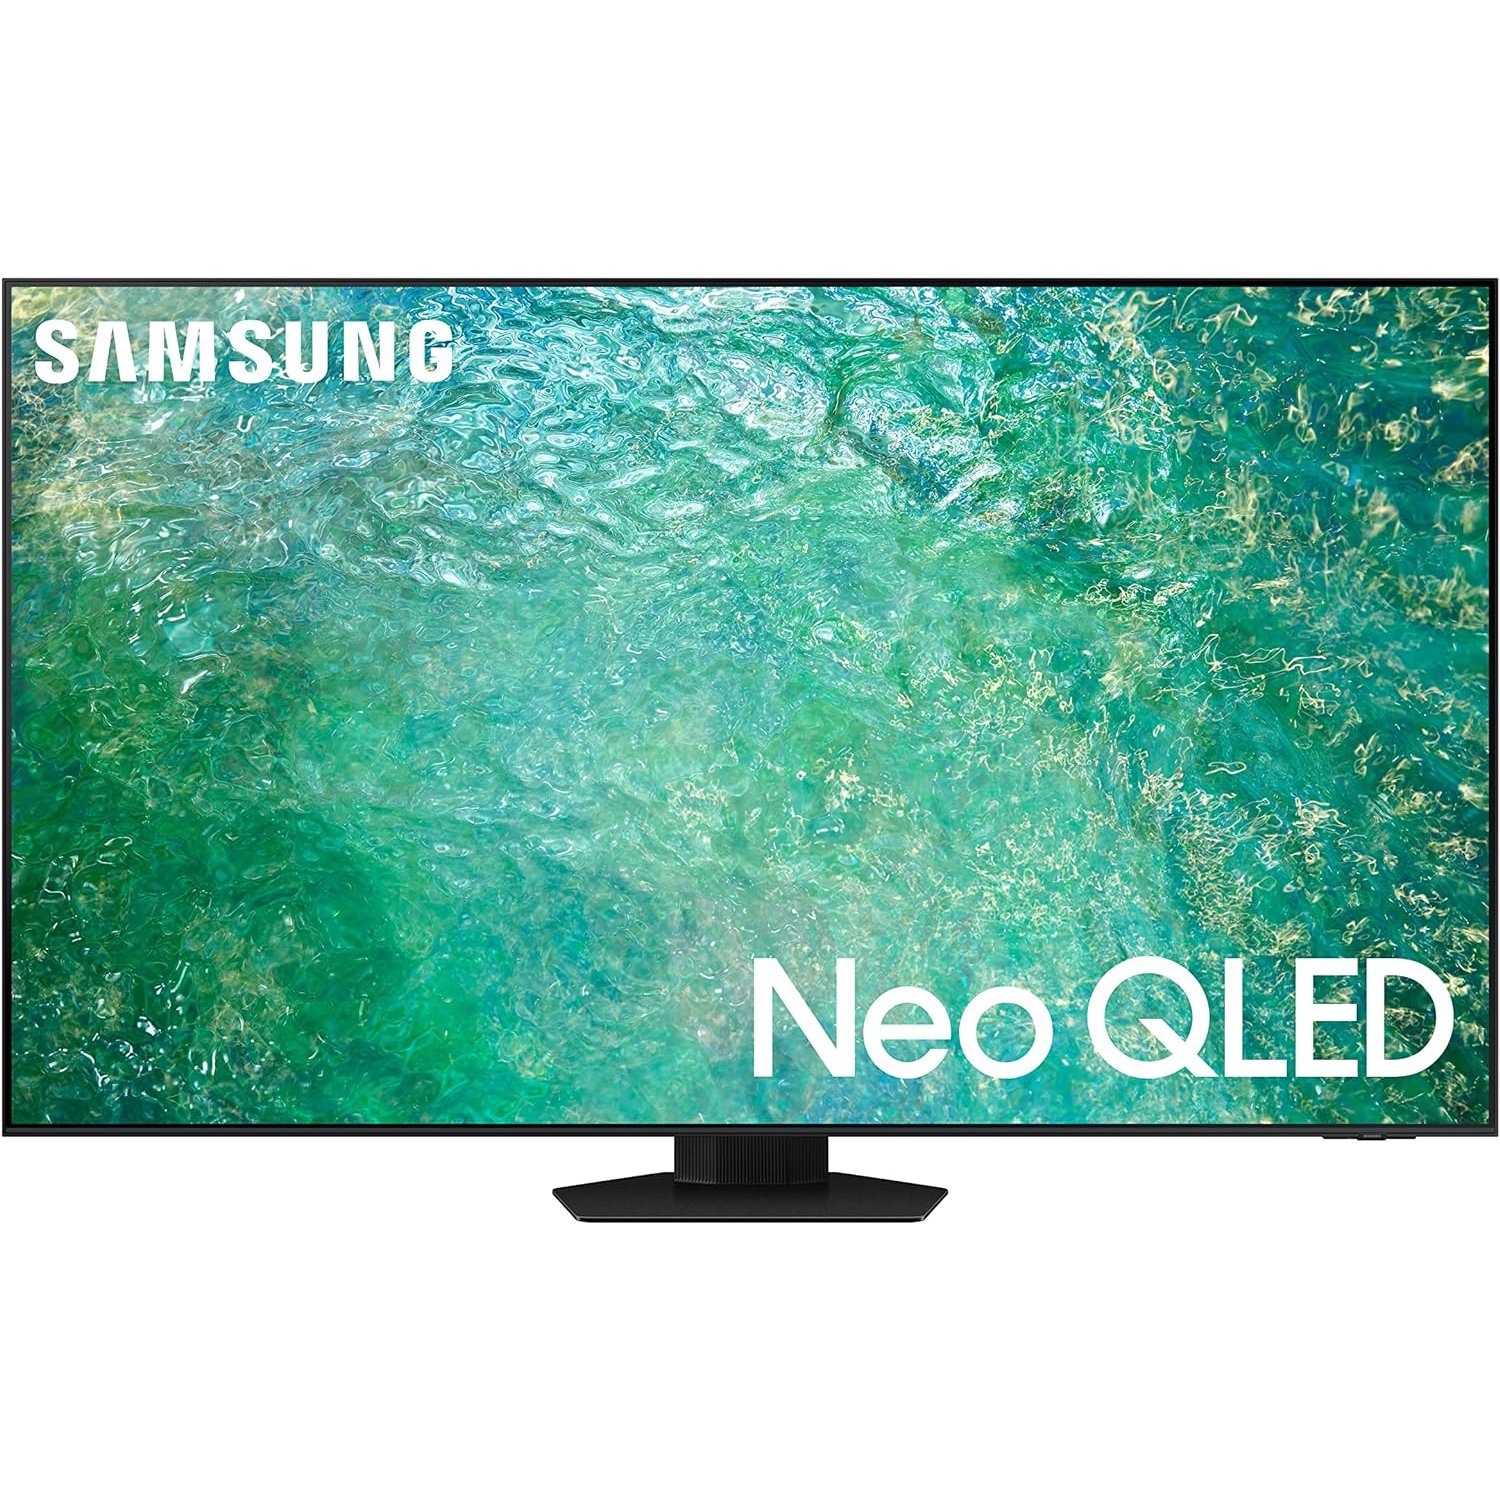 Samsung 85" 4K UHD QLED Tizen OS Smart TV (QN85QN85CAFXZC) - 2023 - Open Box 10/10 Condition with One Year Warranty - TORONTO (GTA) DELIVERY ONLY